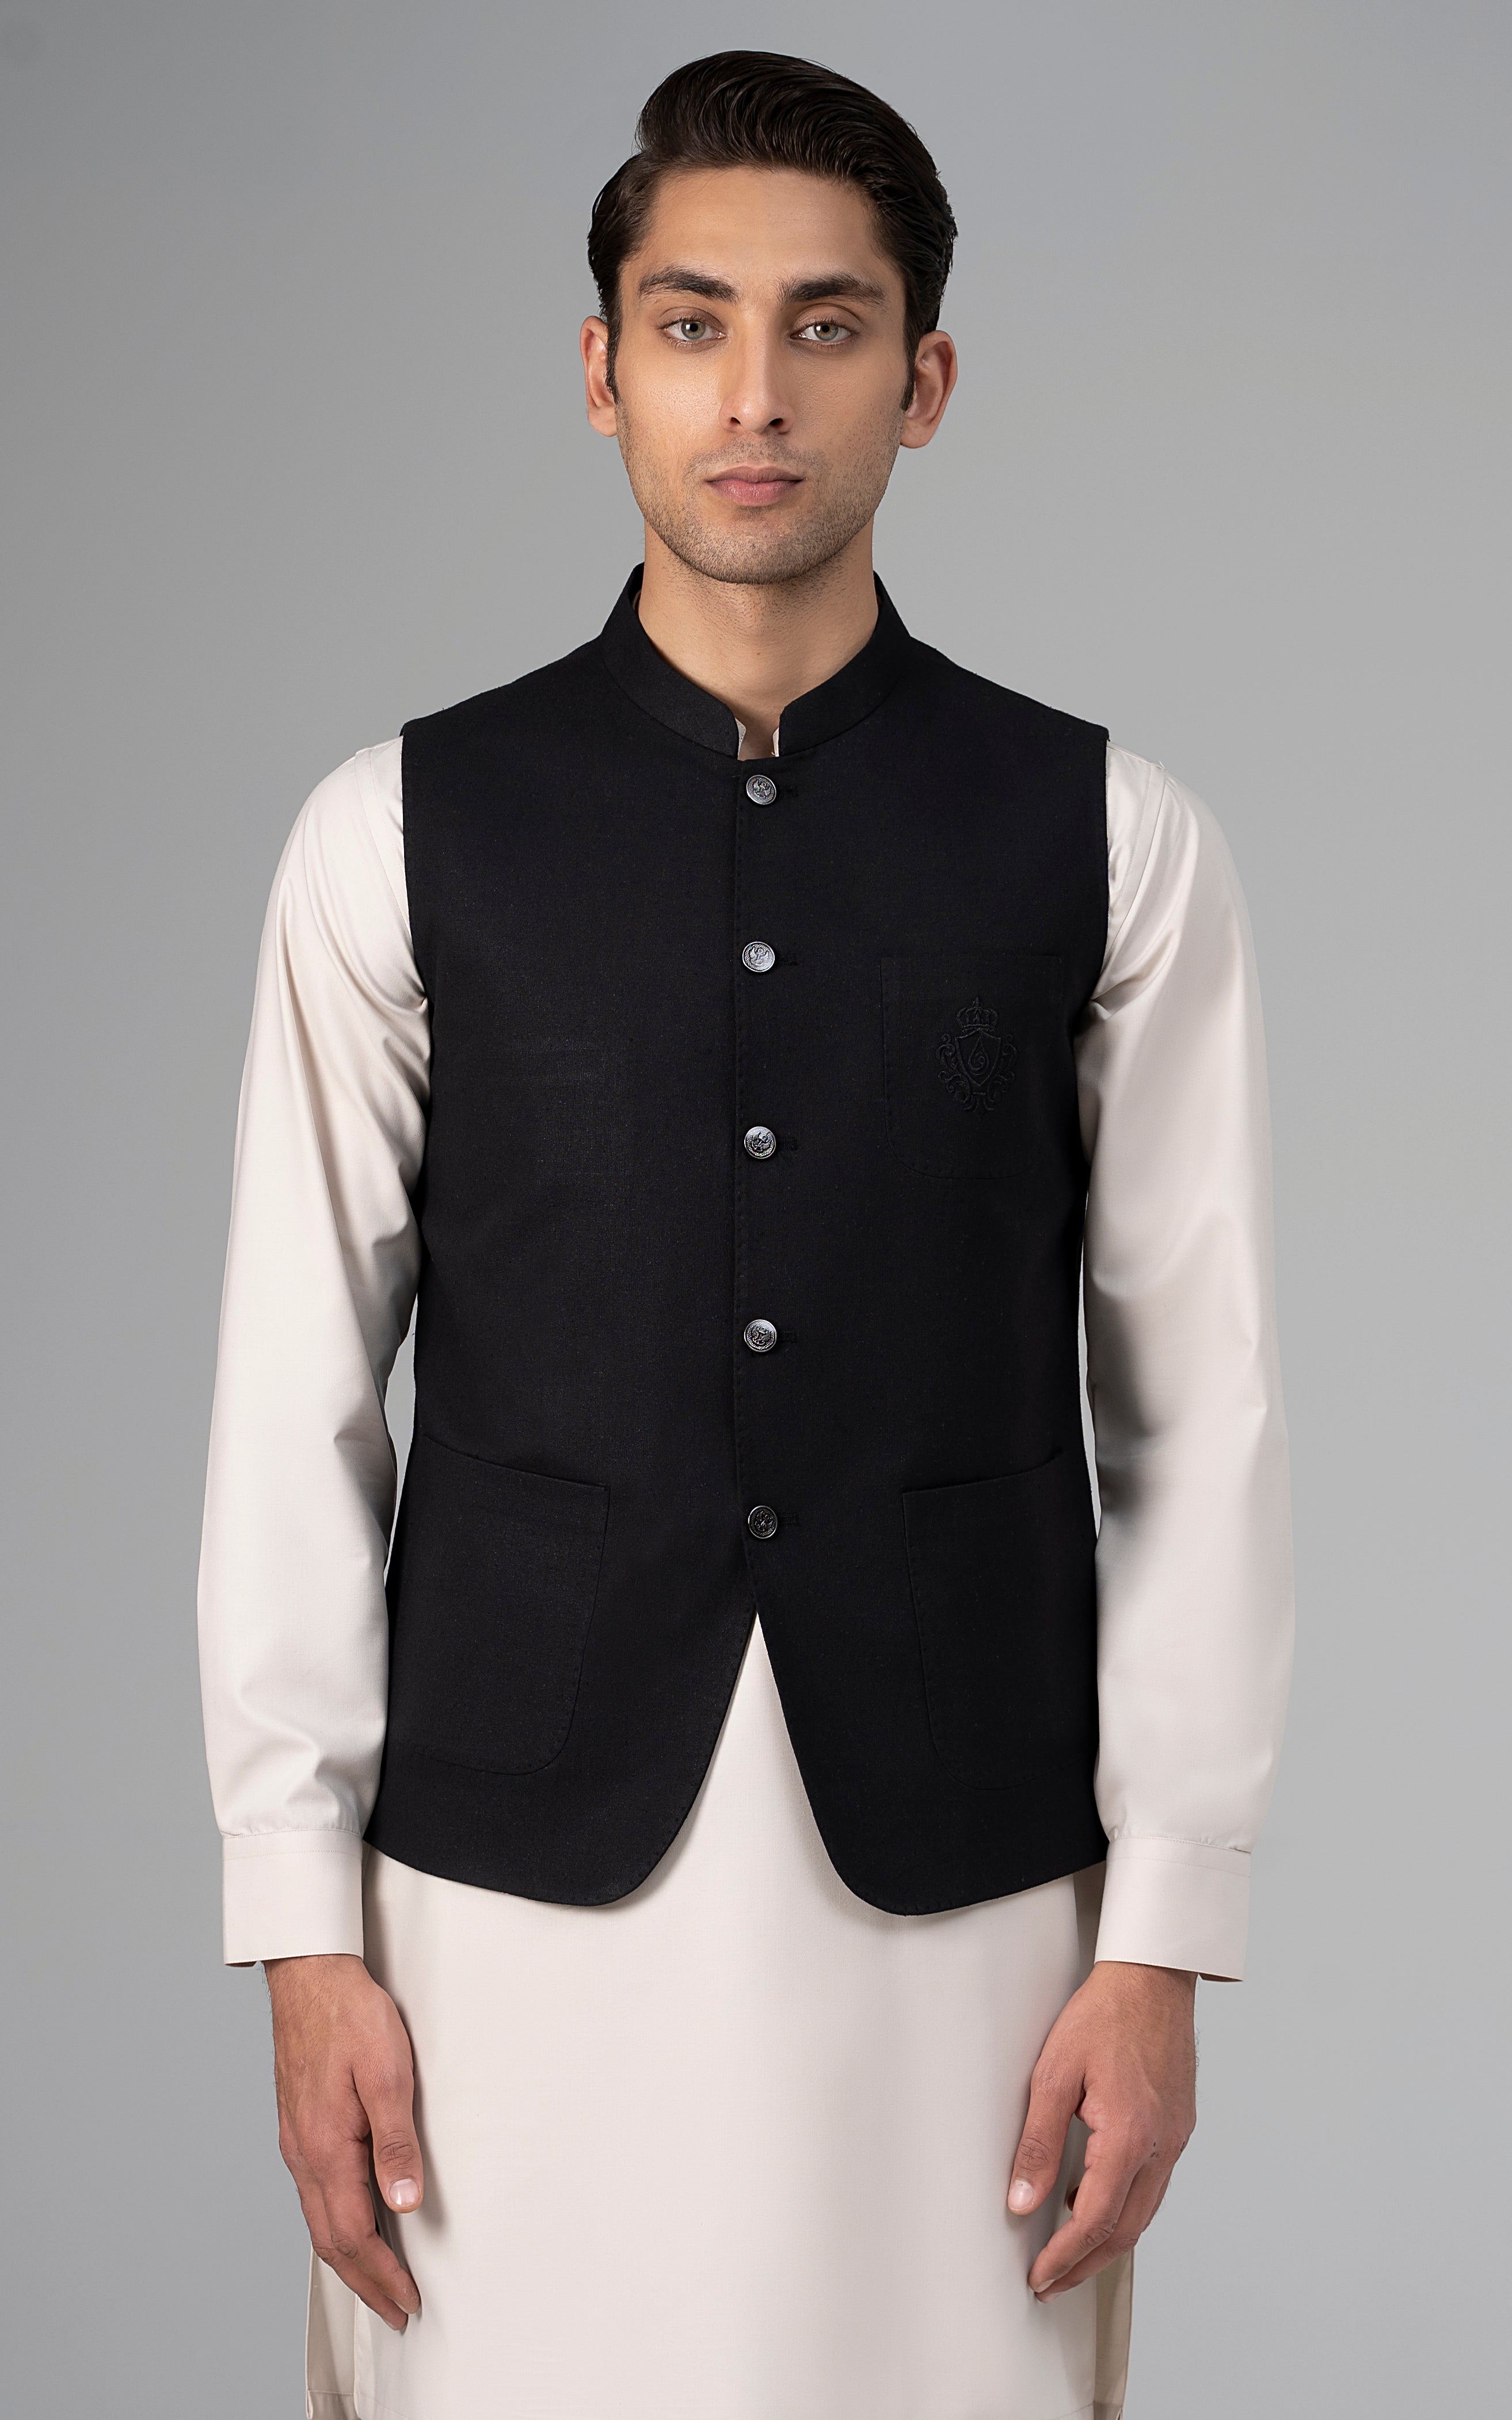 LOGO EMBROIDERED WAISTCOAT- CLASSIC COLLECTION BLACK